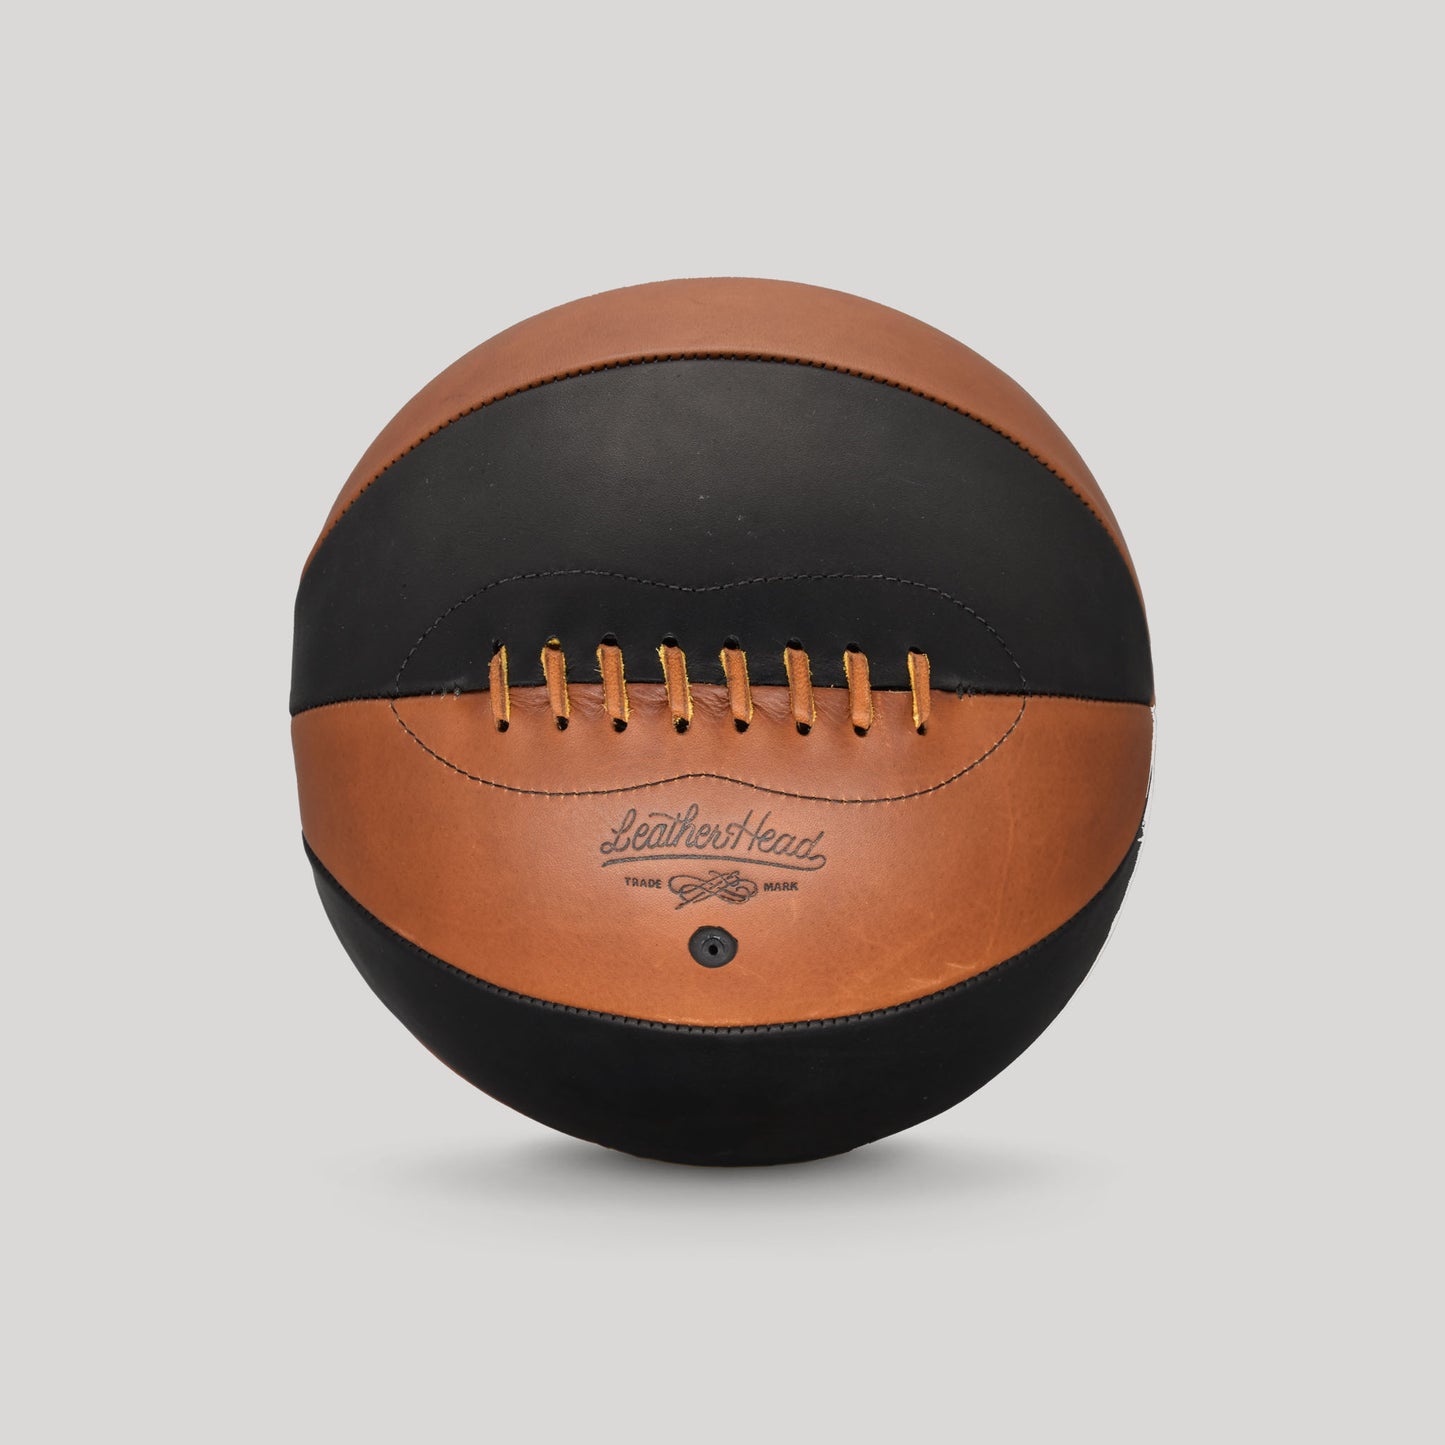 Black and Tan Basketball – Leather Head Sports